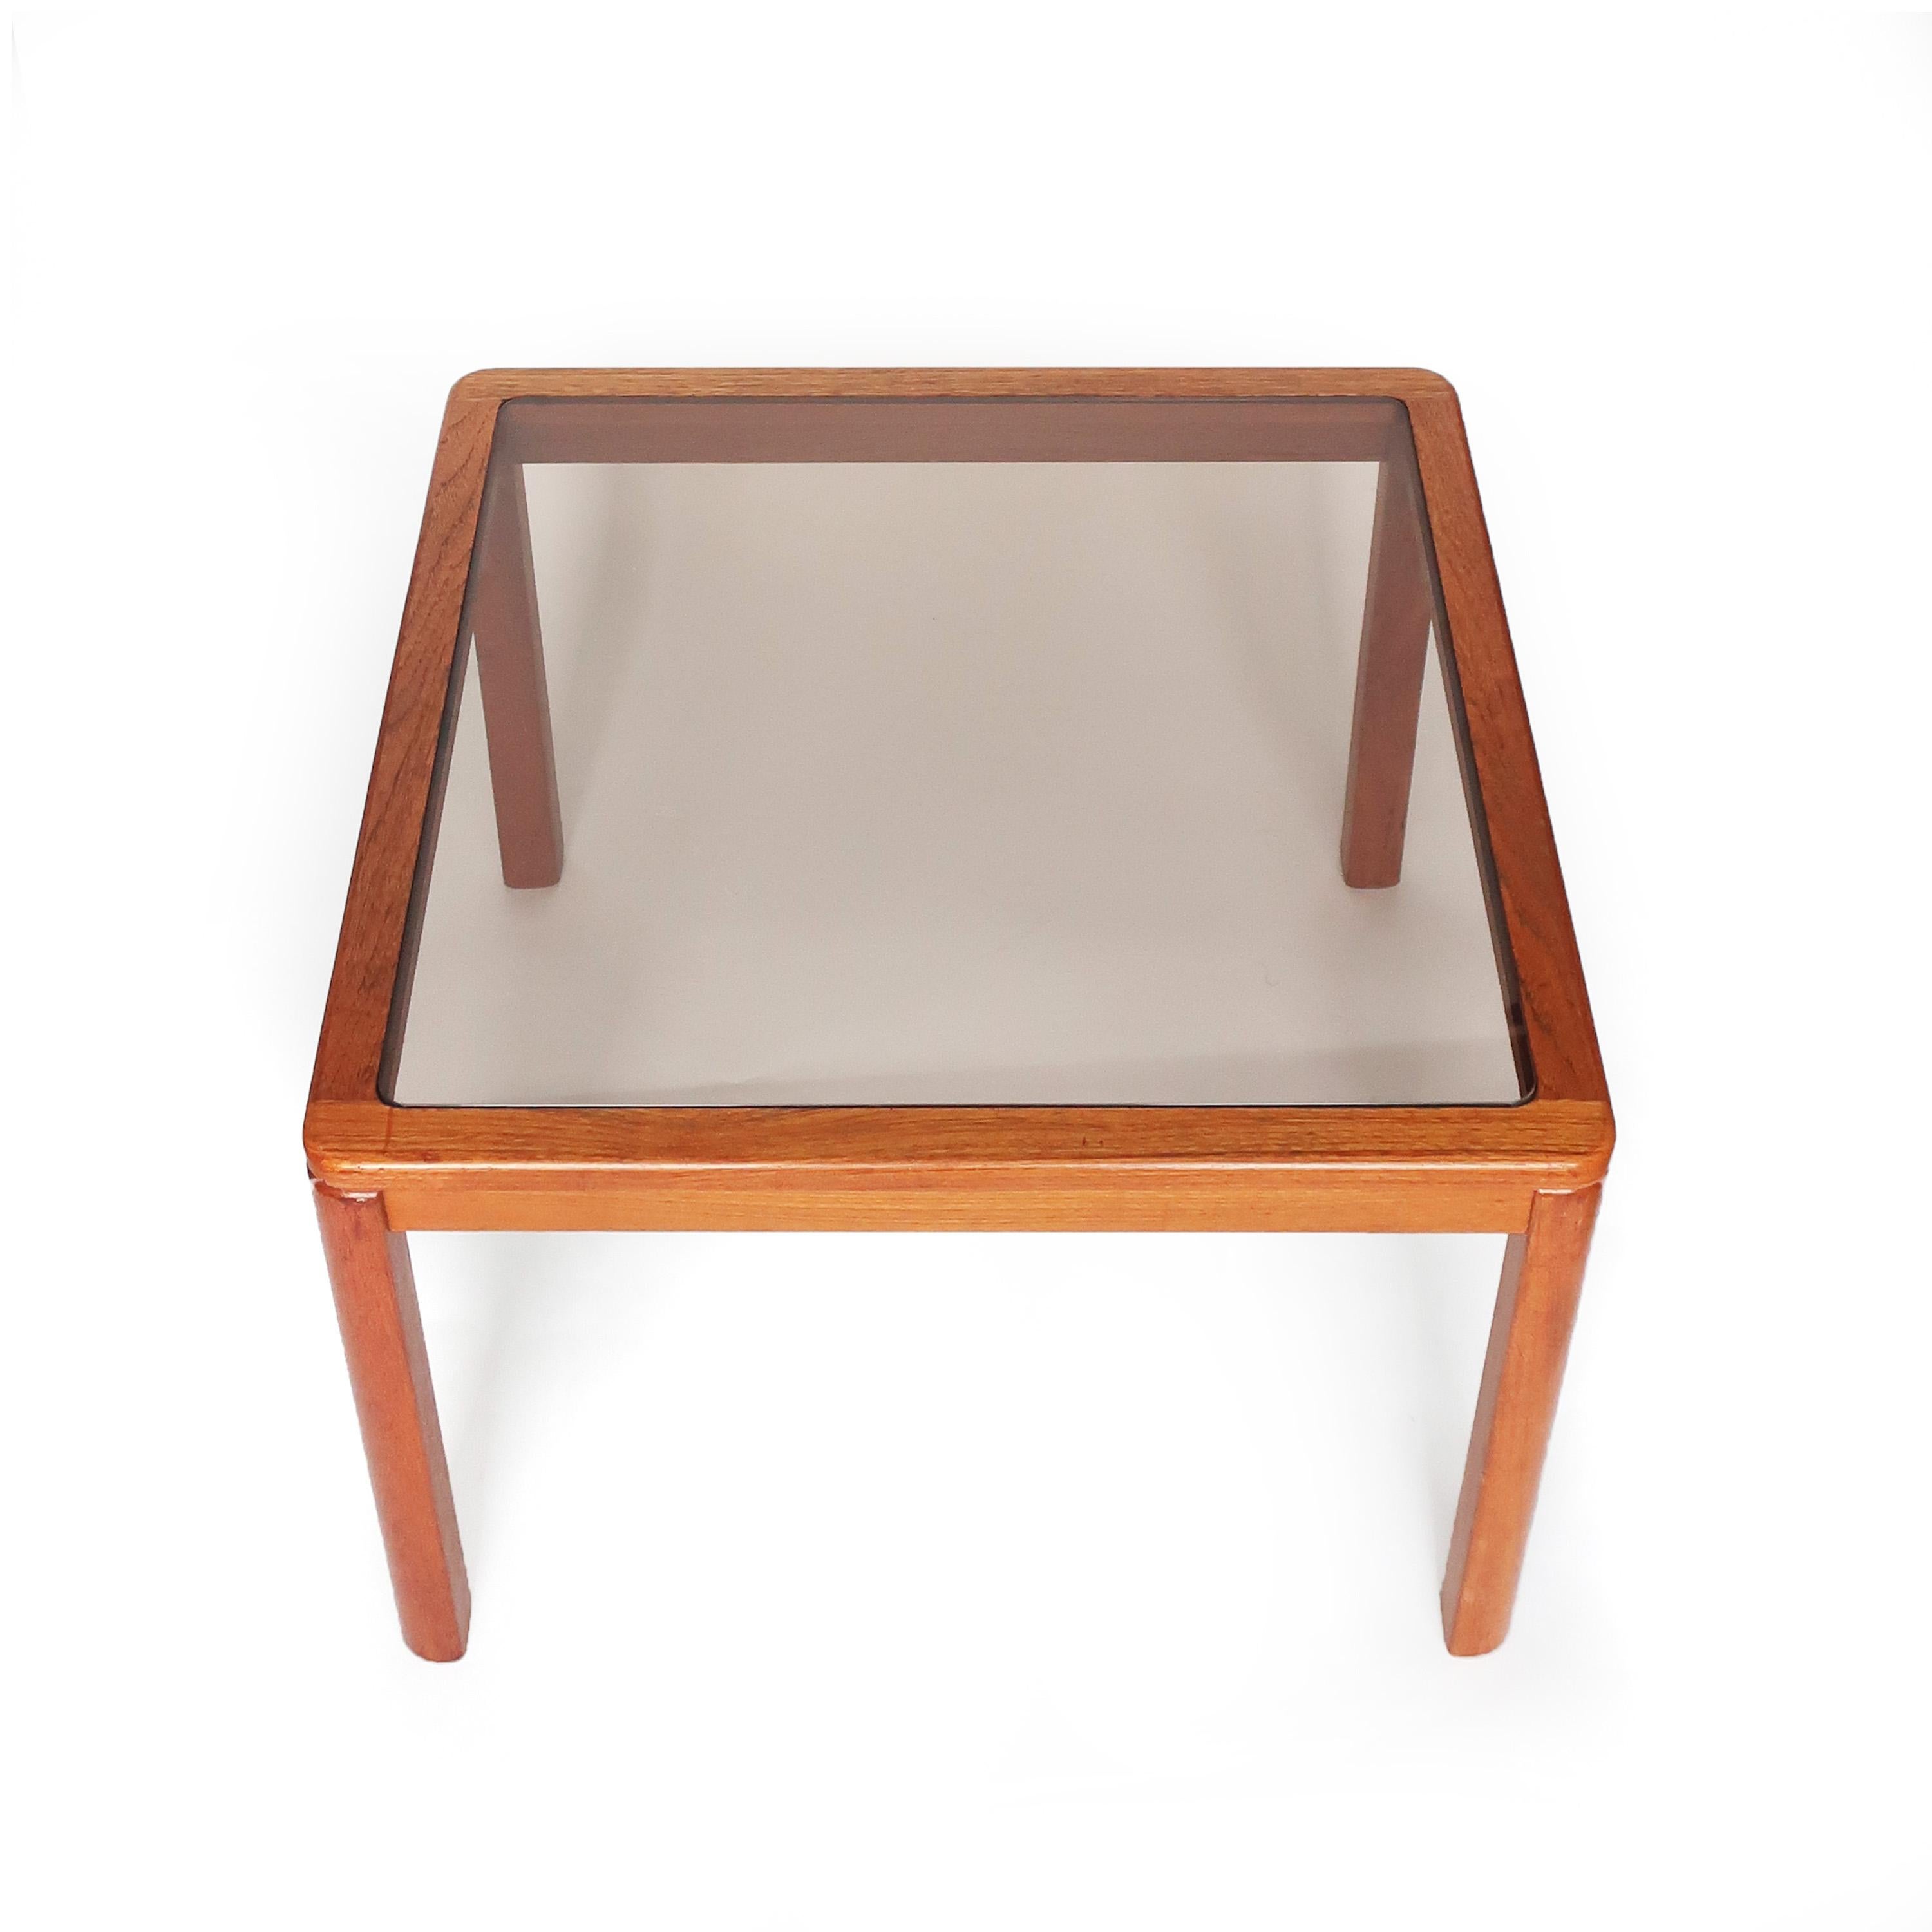 Lovely Mid-Century Modern teak and smoked glass end or side table by Danish furniture manufacturer Uldum Mobelfabrik. Solid teak frame with rounded corners that soften the table's feel and a piece of smoked glass inset to form the table top. Sleek